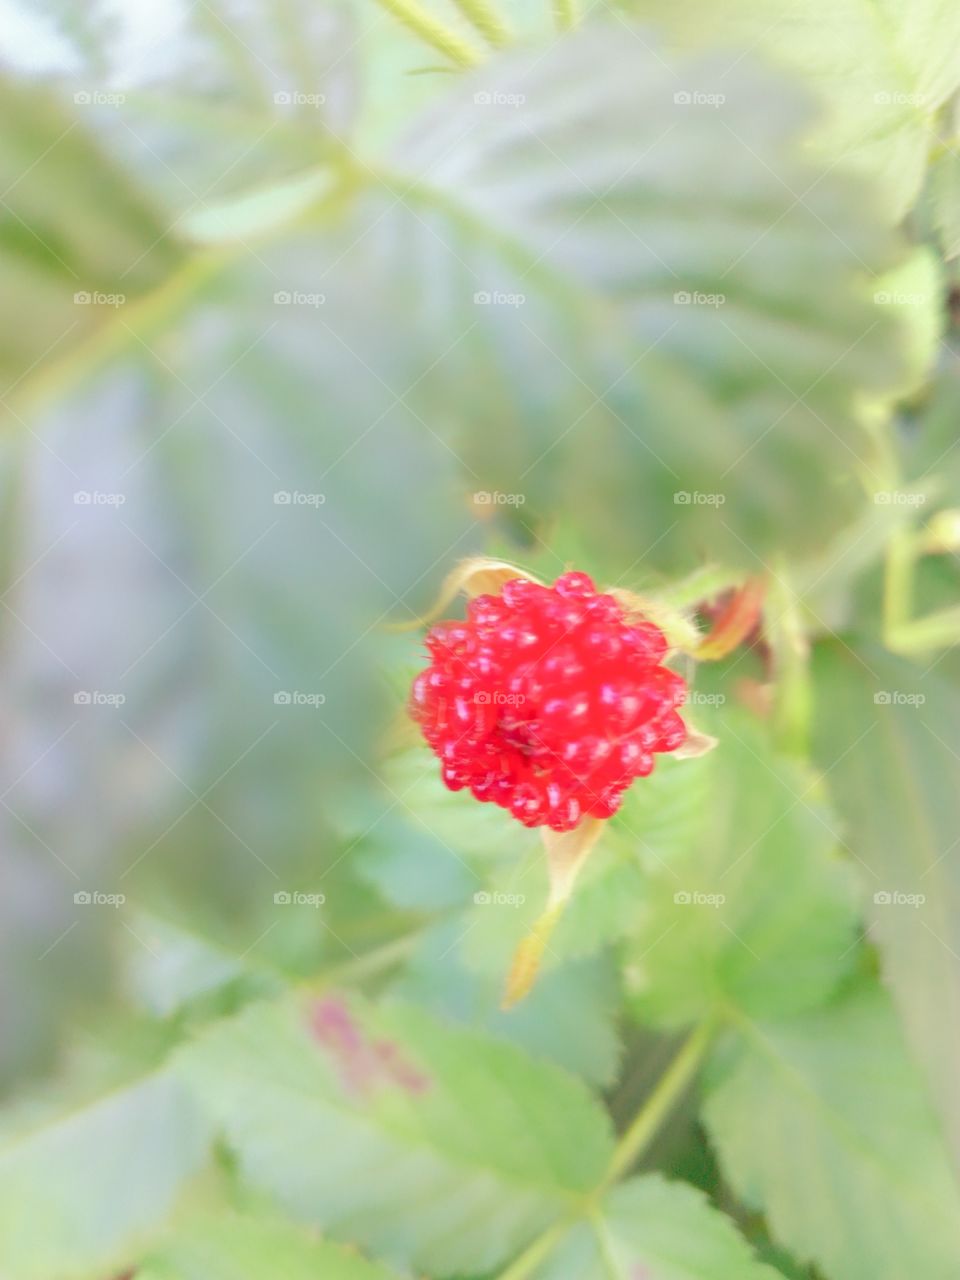 strawberry with blur background